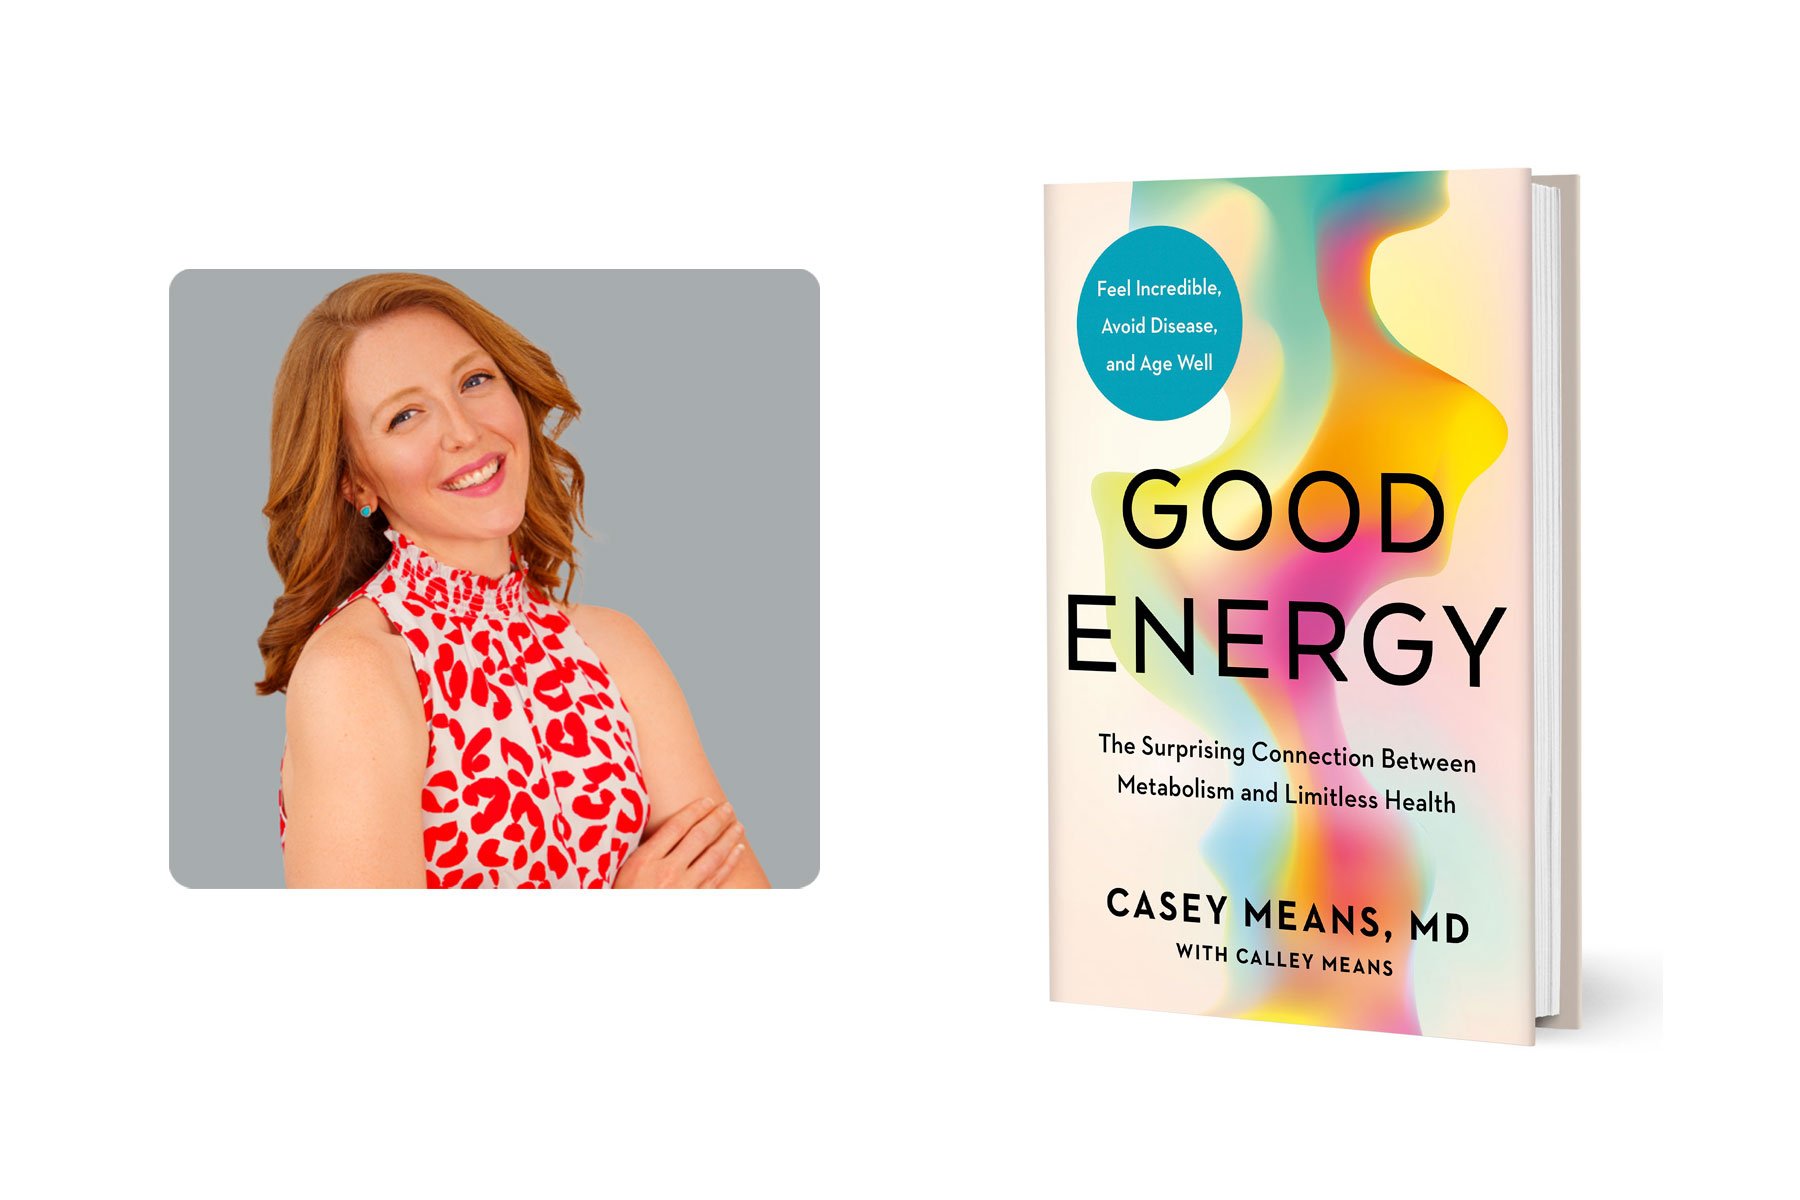 Announcing: Dr. Casey Means’ new book, Good Energy